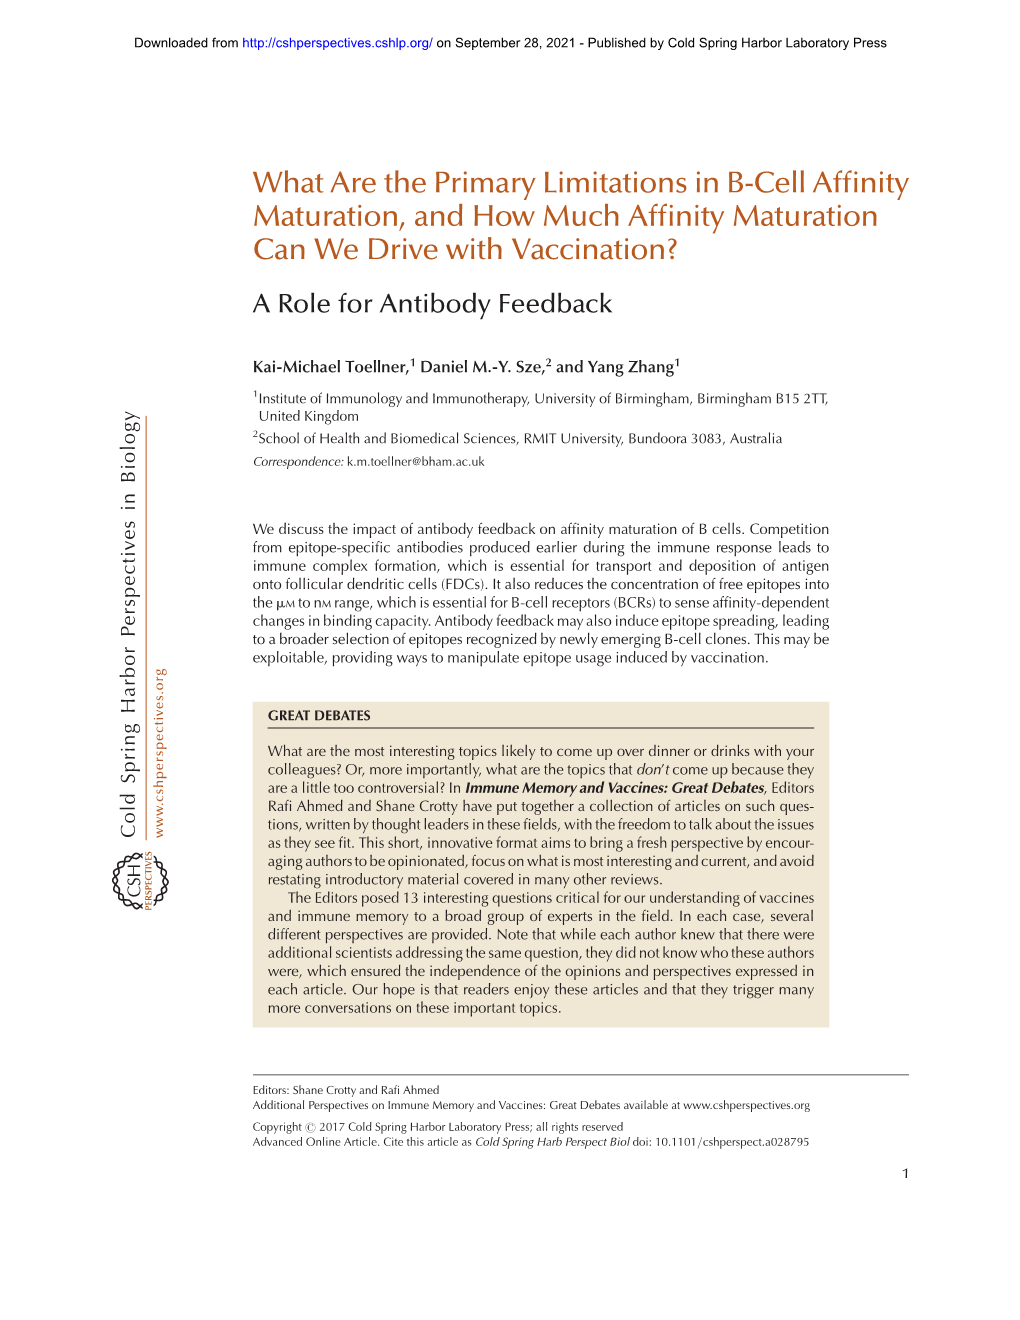 What Are the Primary Limitations in B-Cell Affinity Maturation, and How Much Affinity Maturation Can We Drive with Vaccination?: a Role for Antibody Feedback